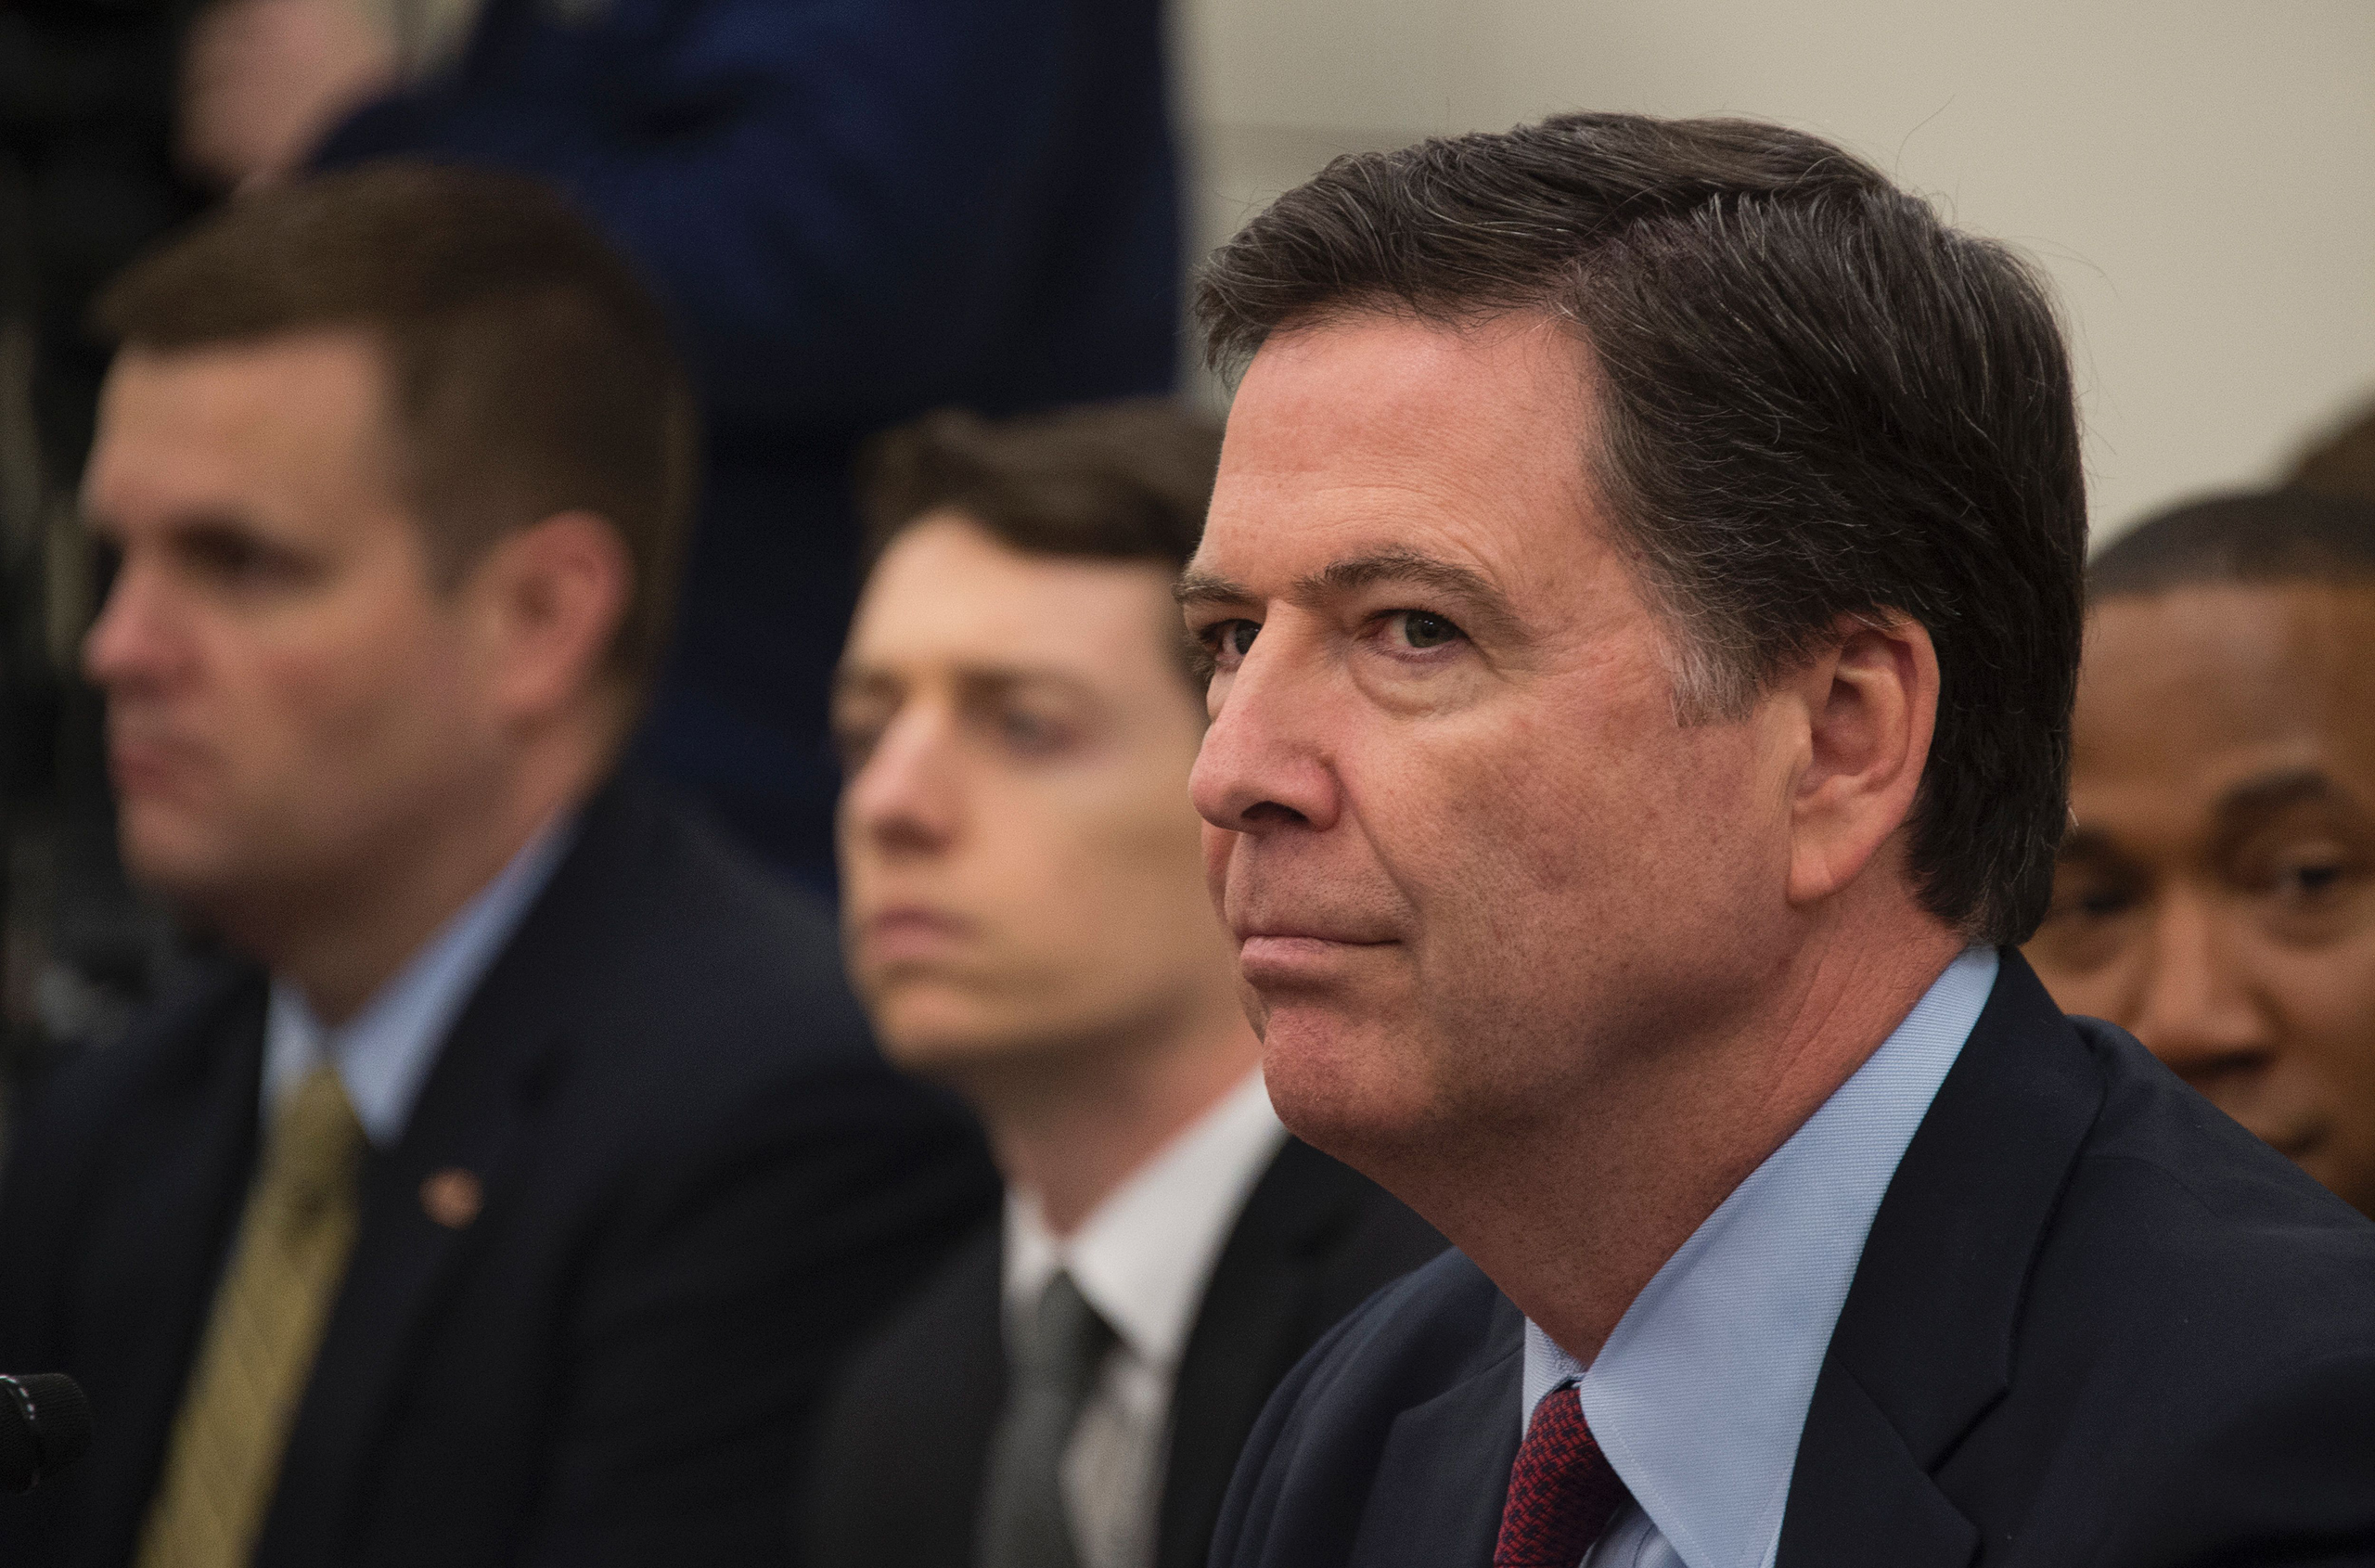 Federal Bureau of Investigation Director James Comey testifies before the House Appropriations Committee on Capitol Hill in Washington, DC, on Feb. 25, 2016. (Jim Watson—AFP/Getty Images)